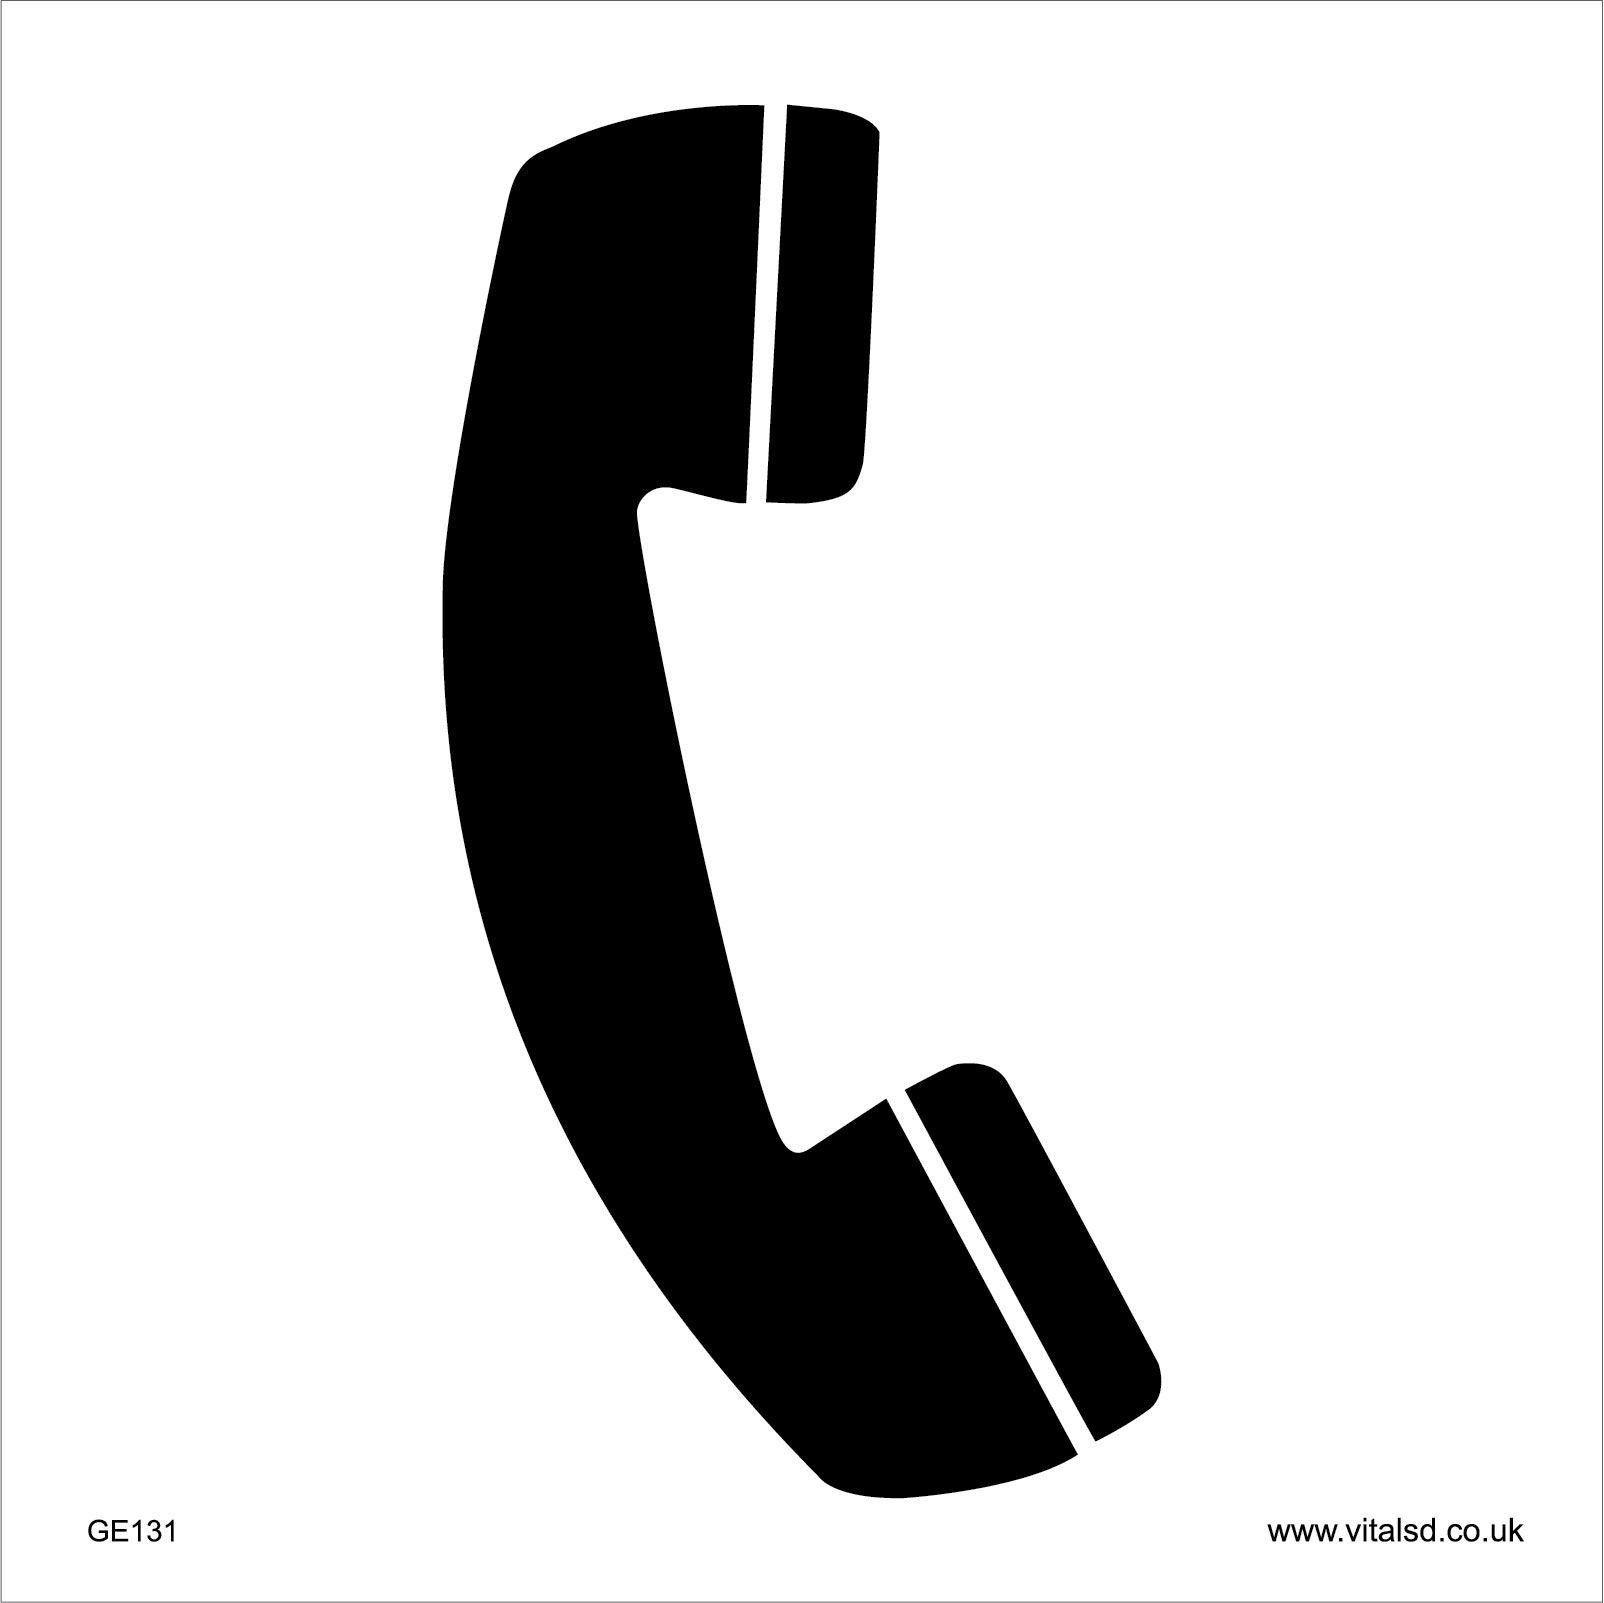 Black and White Telephone Logo - GE131 CL 0150 0150 Telephone Sign 150 X 150mm X 6 Clear Sticker